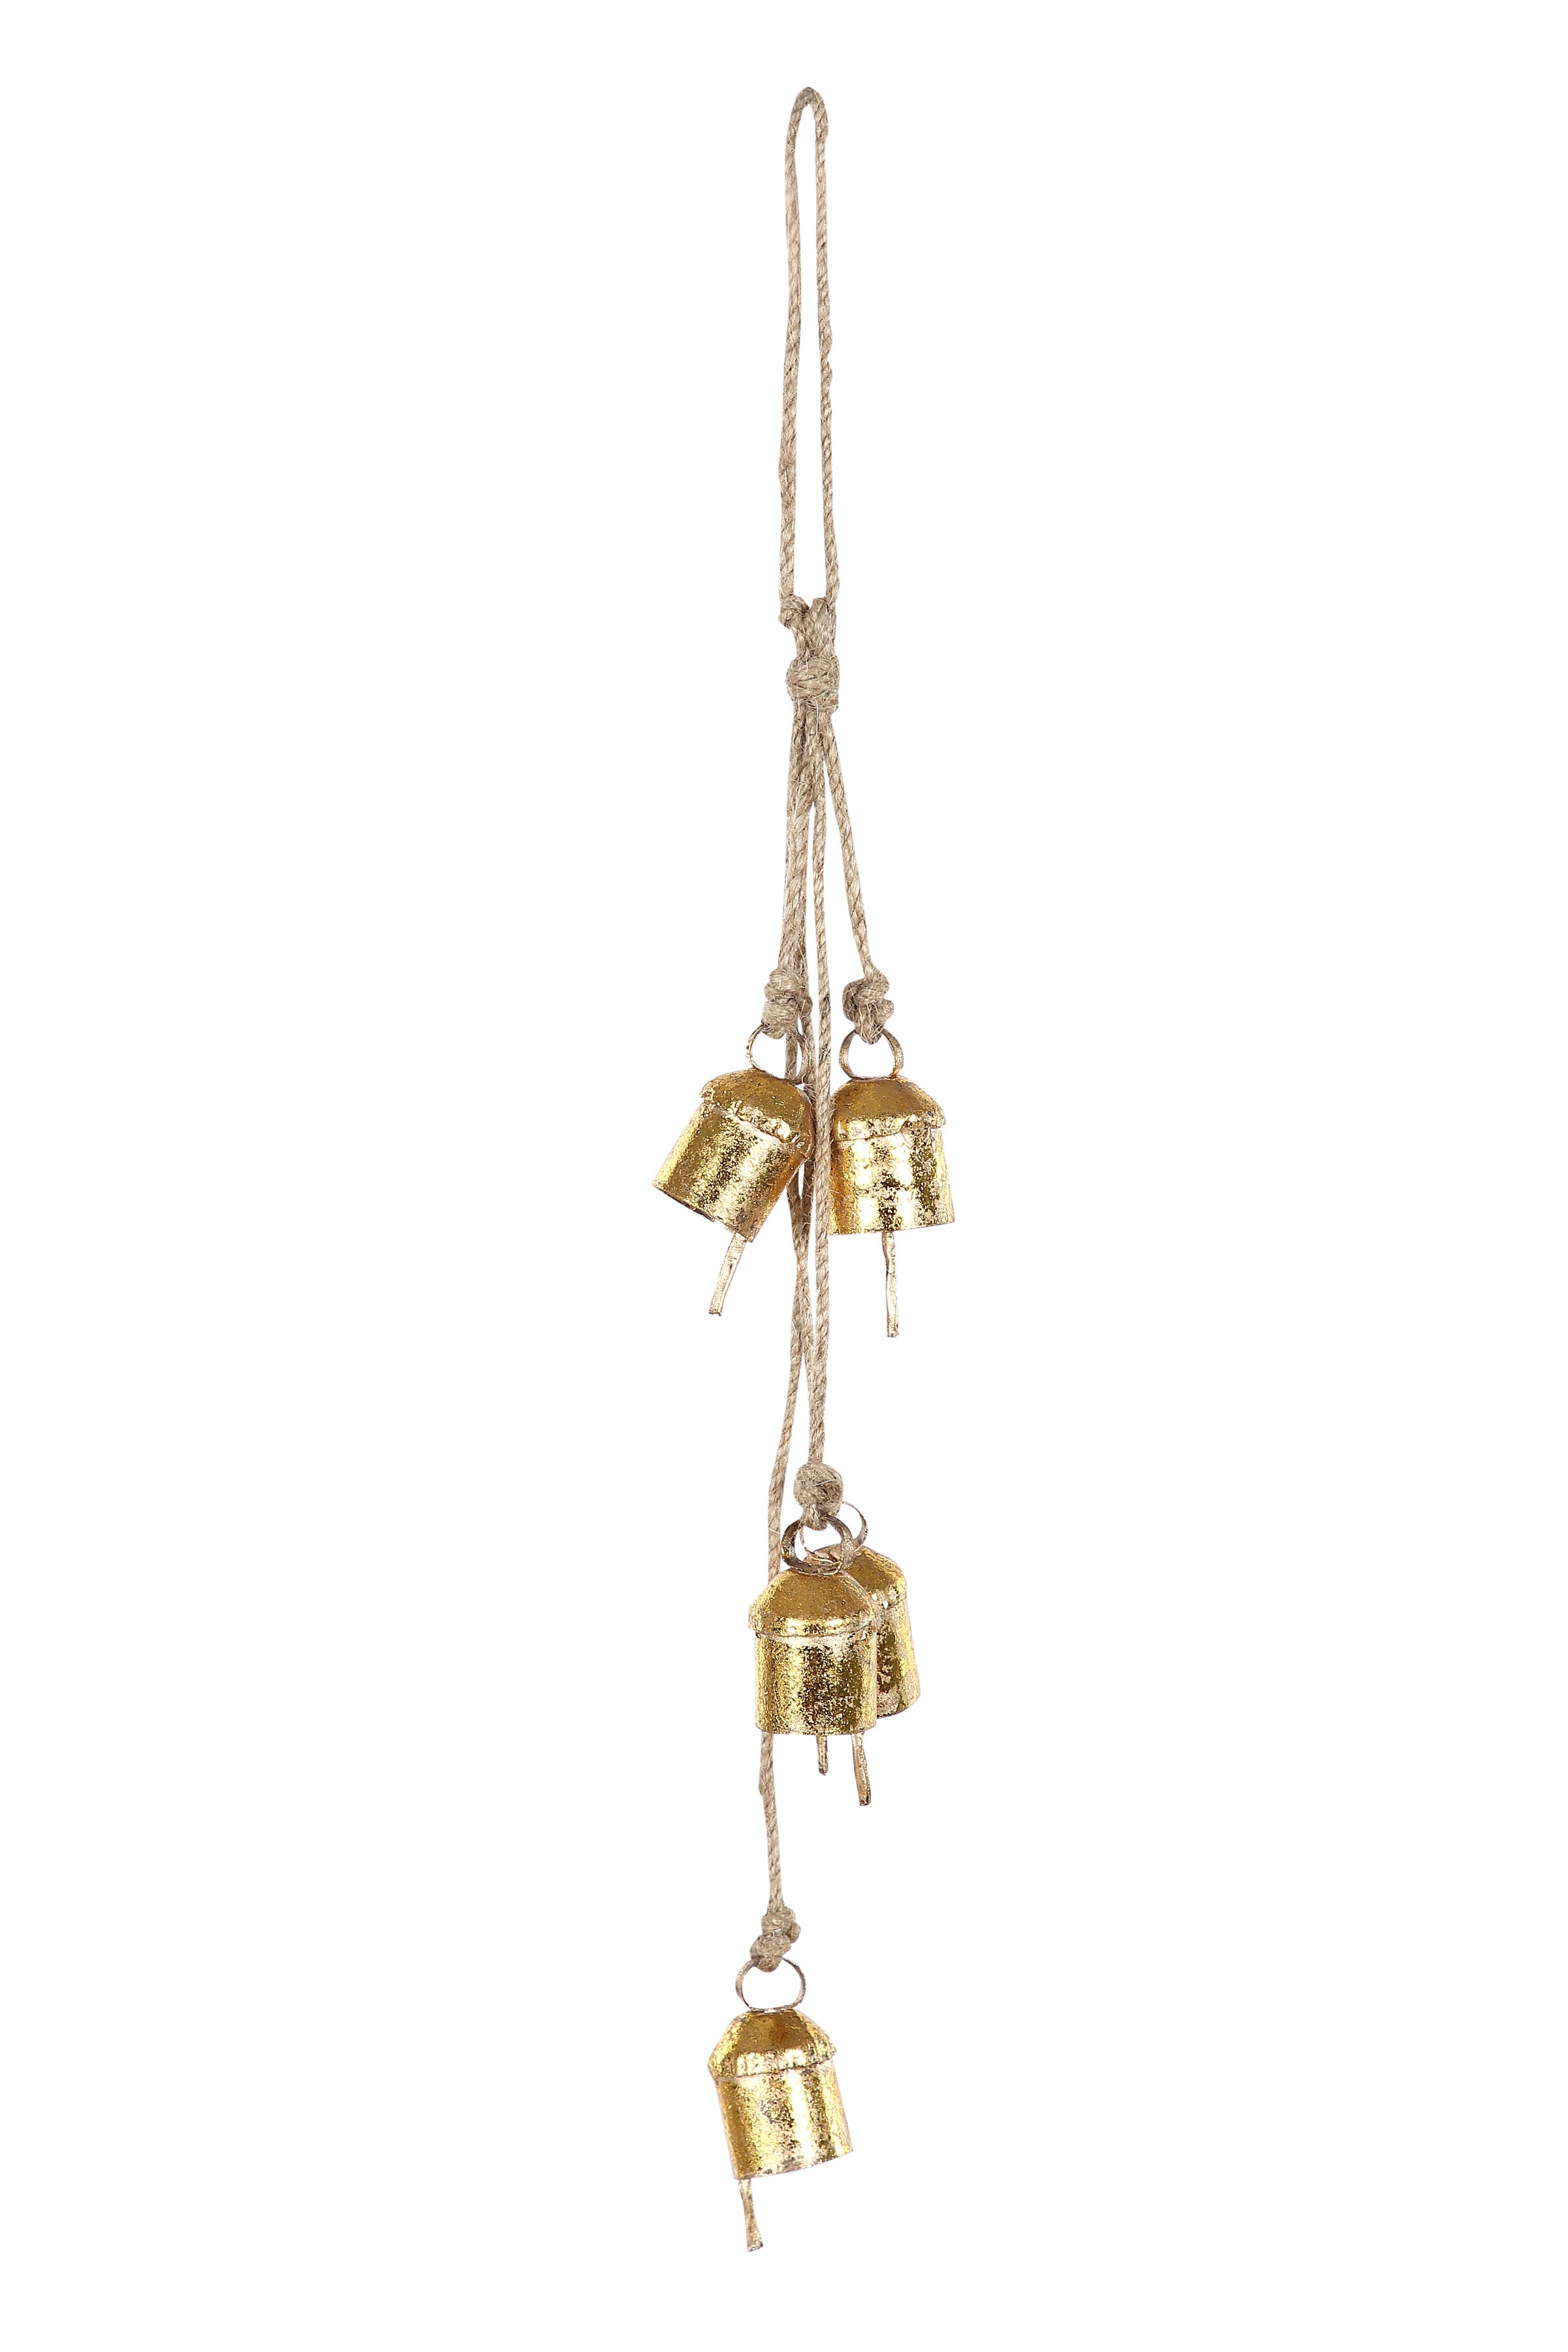 Recycled Iron 5 Bells Wind Chimes with Jute Strings-20inch (Set of 3)